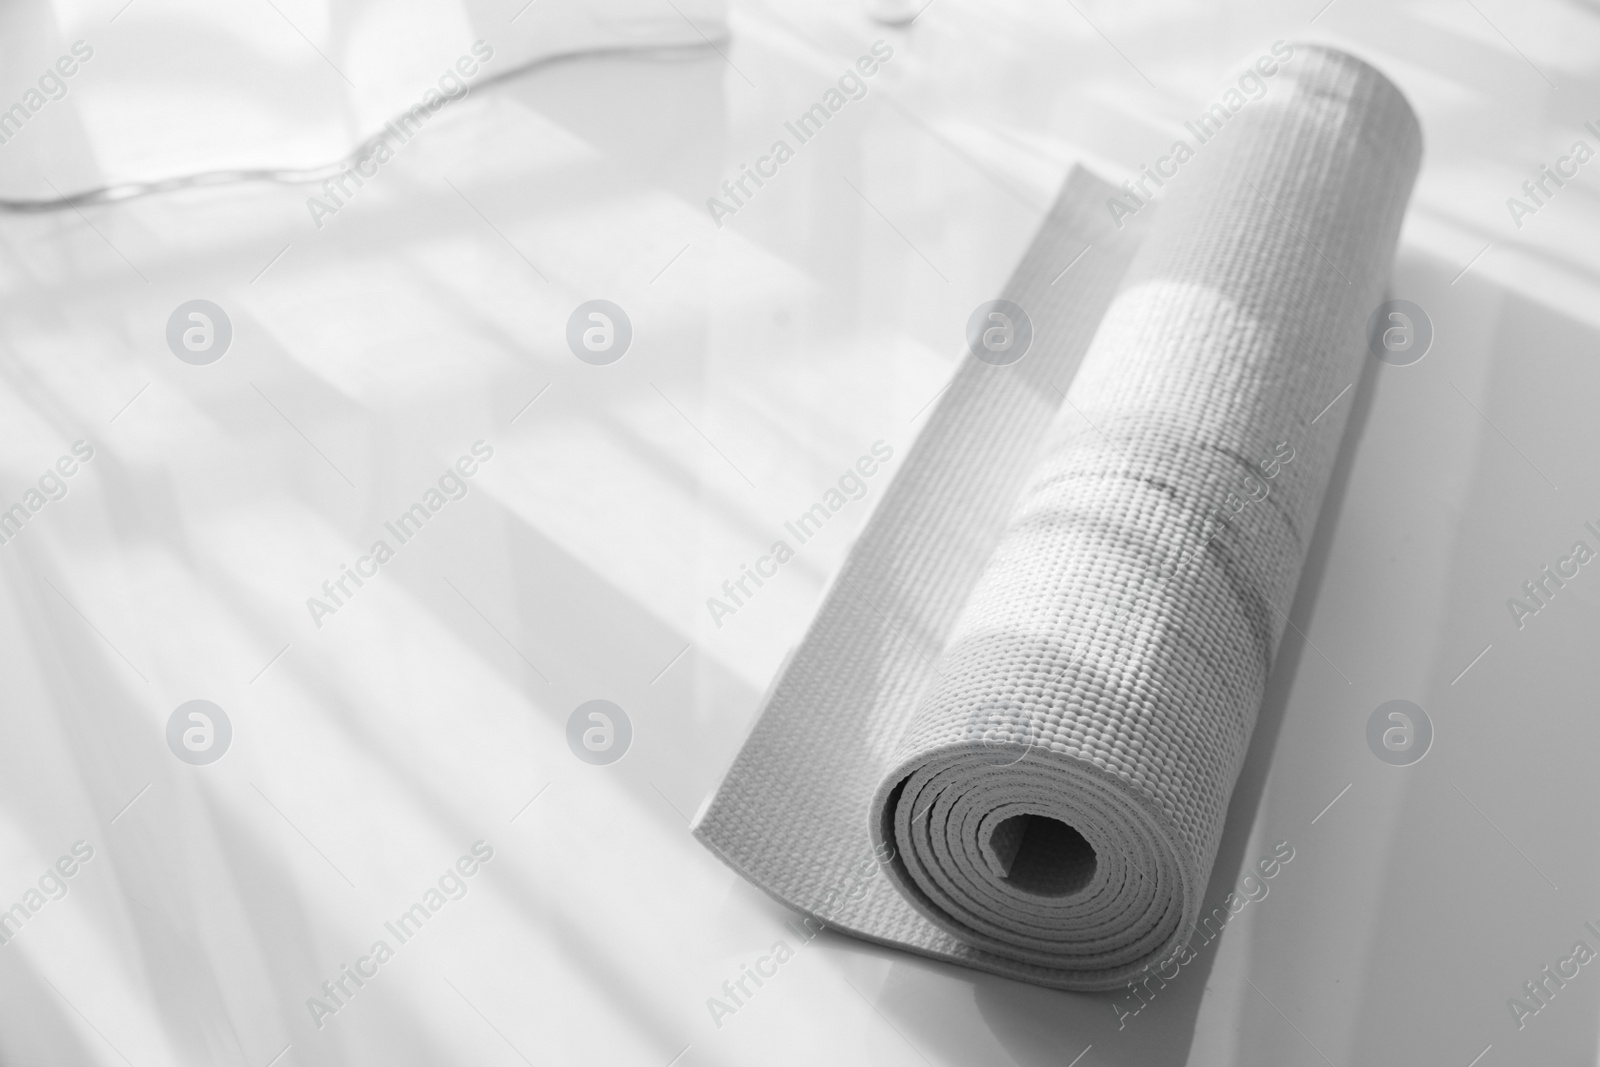 Photo of Rolled karemat or fitness mat on floor indoors, space for text